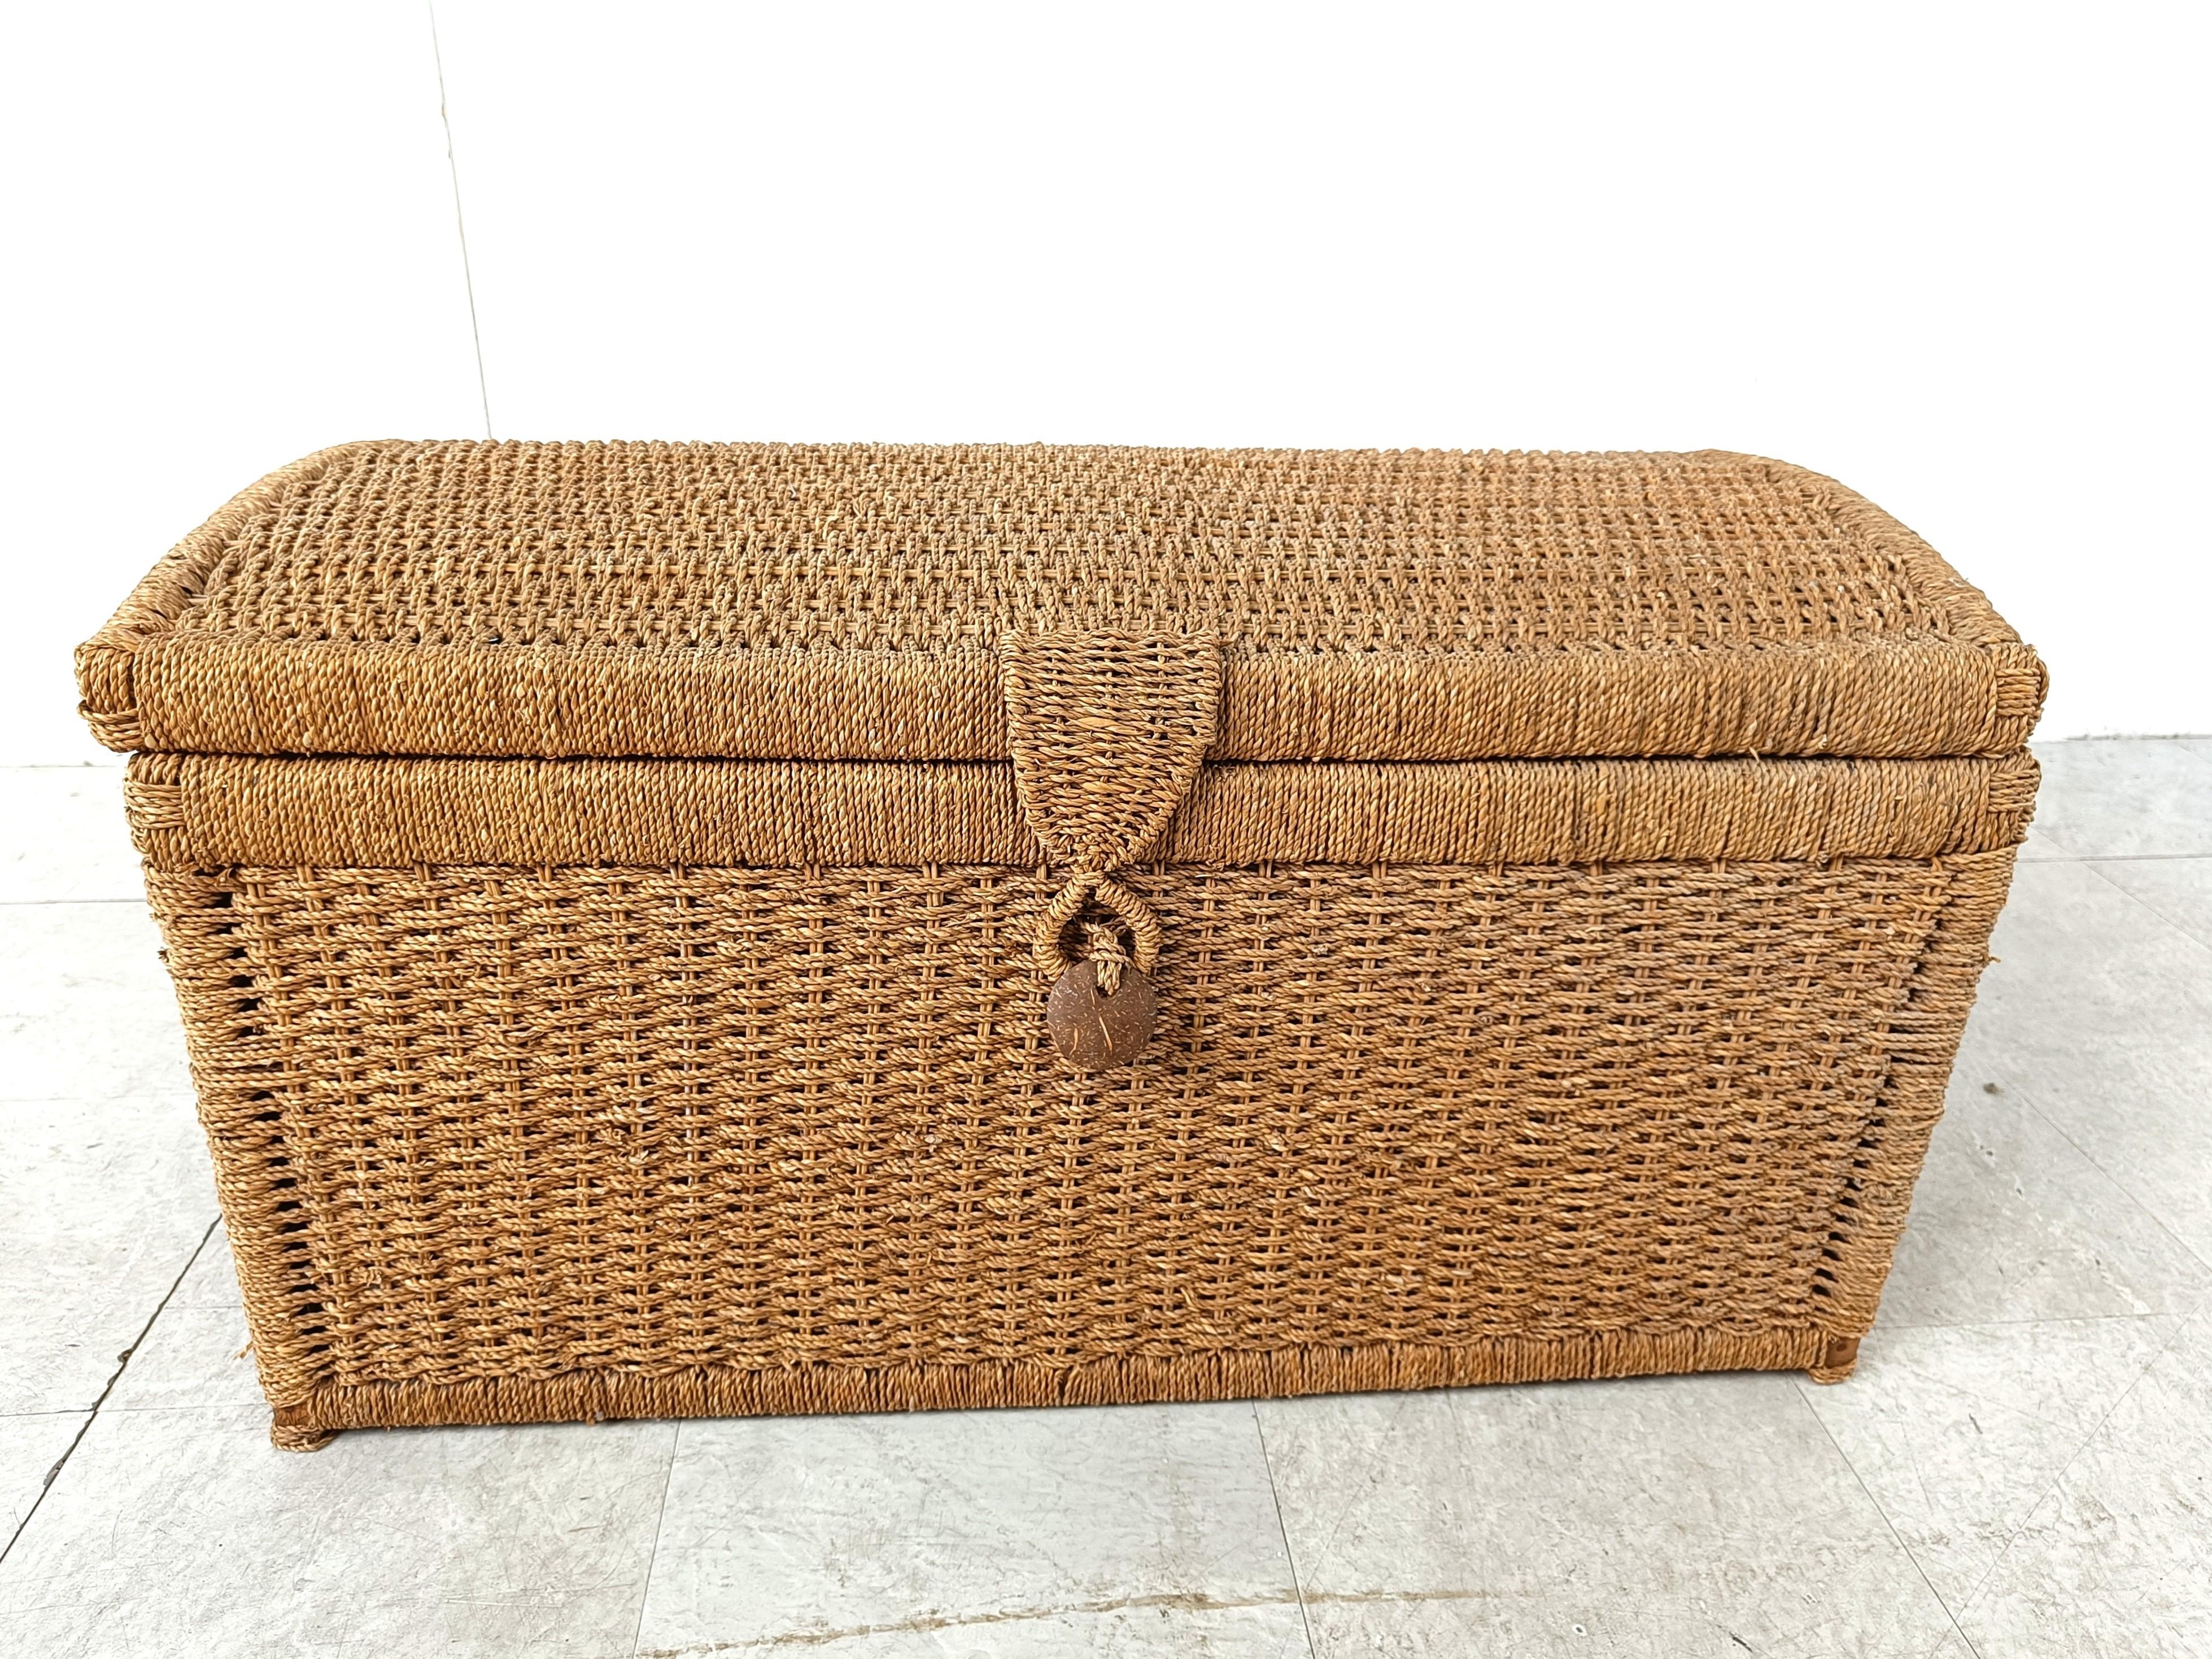 Gorgeous blanket chest or storage box made from papercord.

Nicely made chest with handles and a cool 'lock'.

1970s - Belgium

Height: 46cm
Width: 83cm
Depth: 43cm

Ref.: 503541
